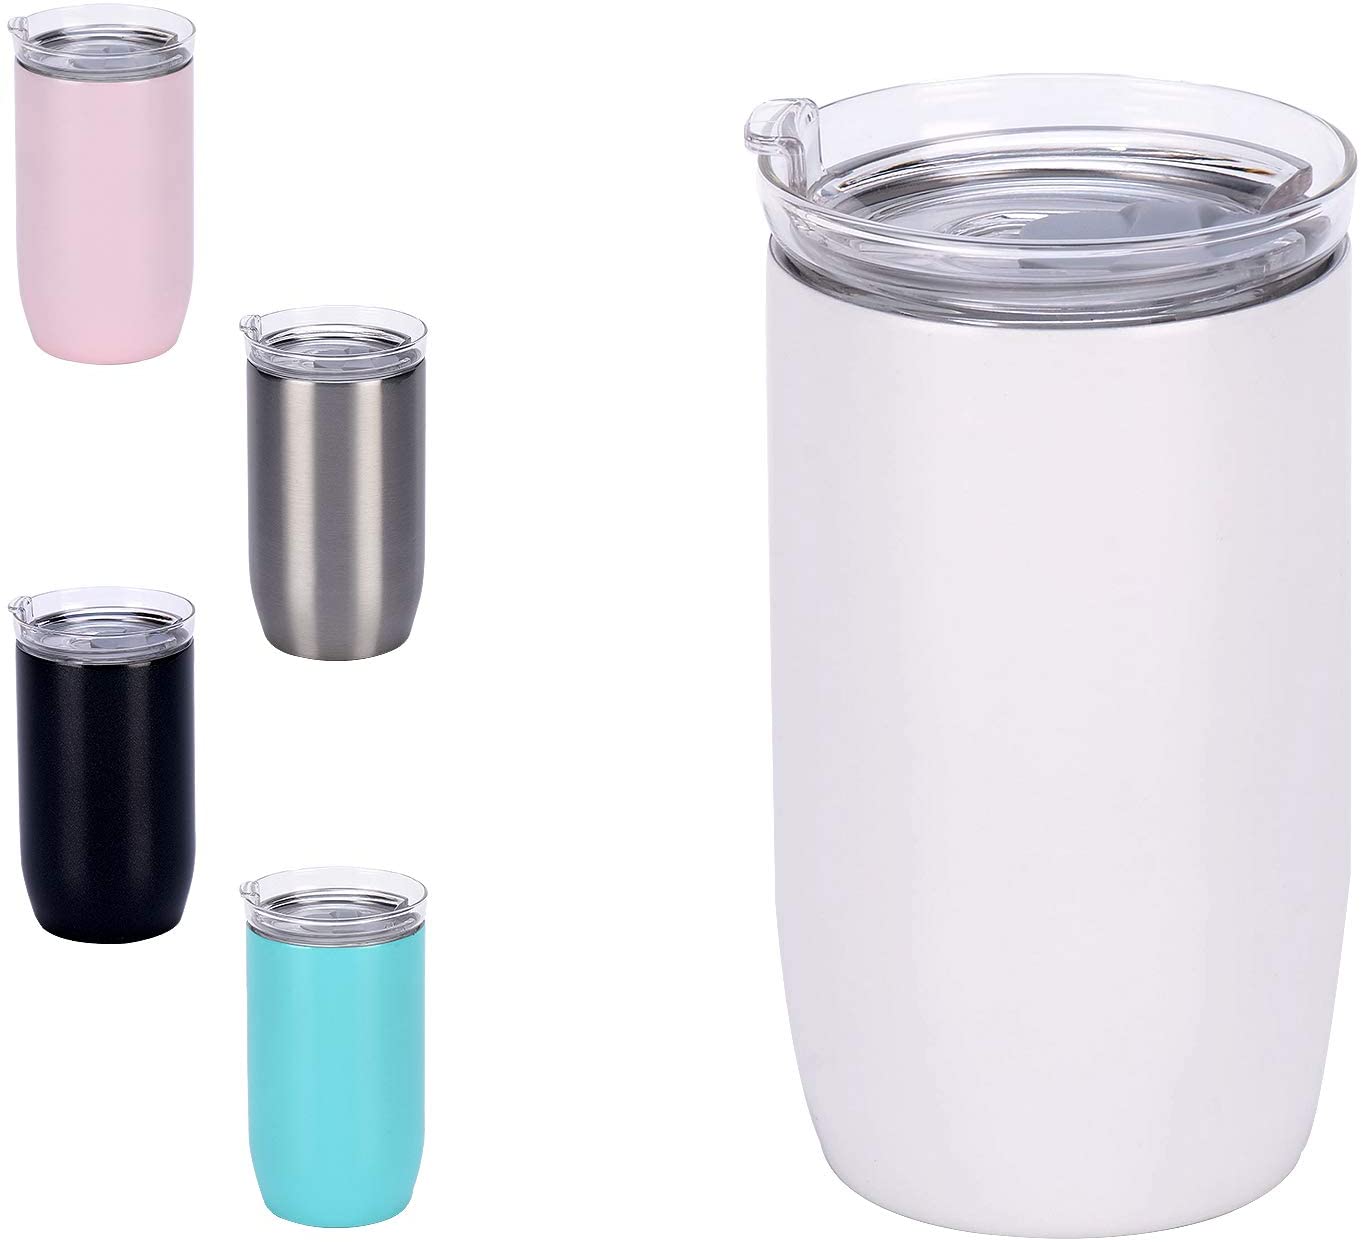 11 oz. glass thermos flask with lid, vacuum stainless steel, glass